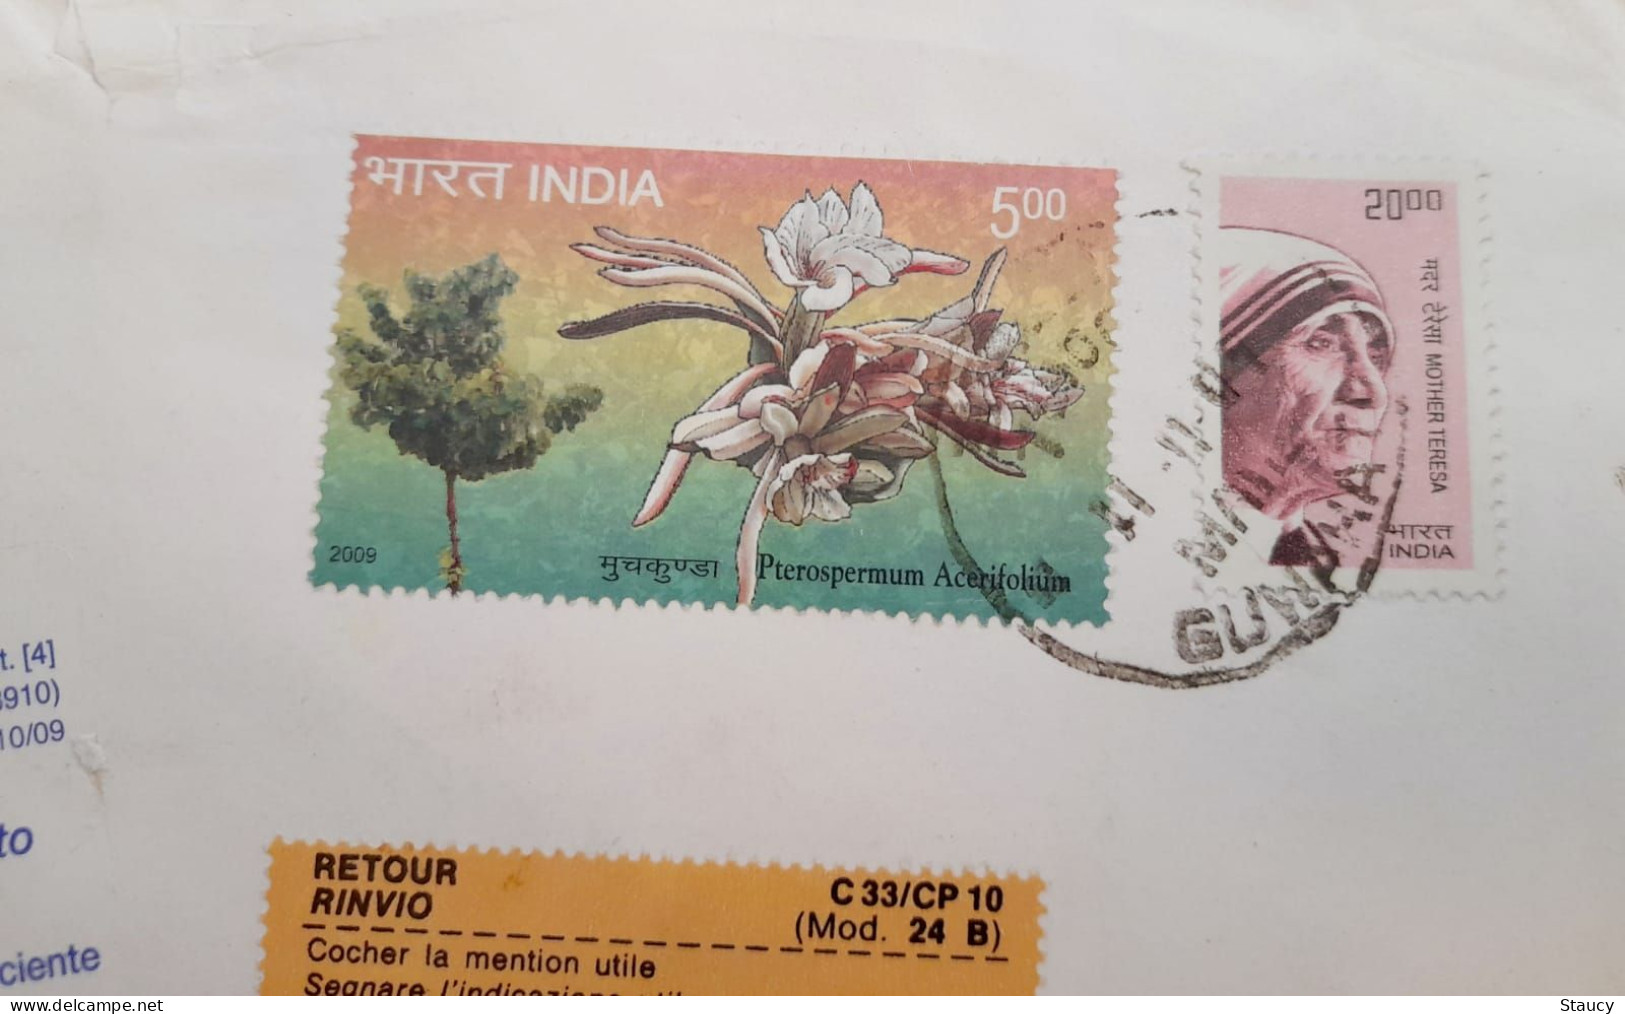 INDIA 2009 RETURN TO SENDER LABEL, AIR MAIL COVER TO SWITZERLAND, 2 STAMPS - MOTHER TERESA + FLOWERS, GUWAHATI - Poste Aérienne